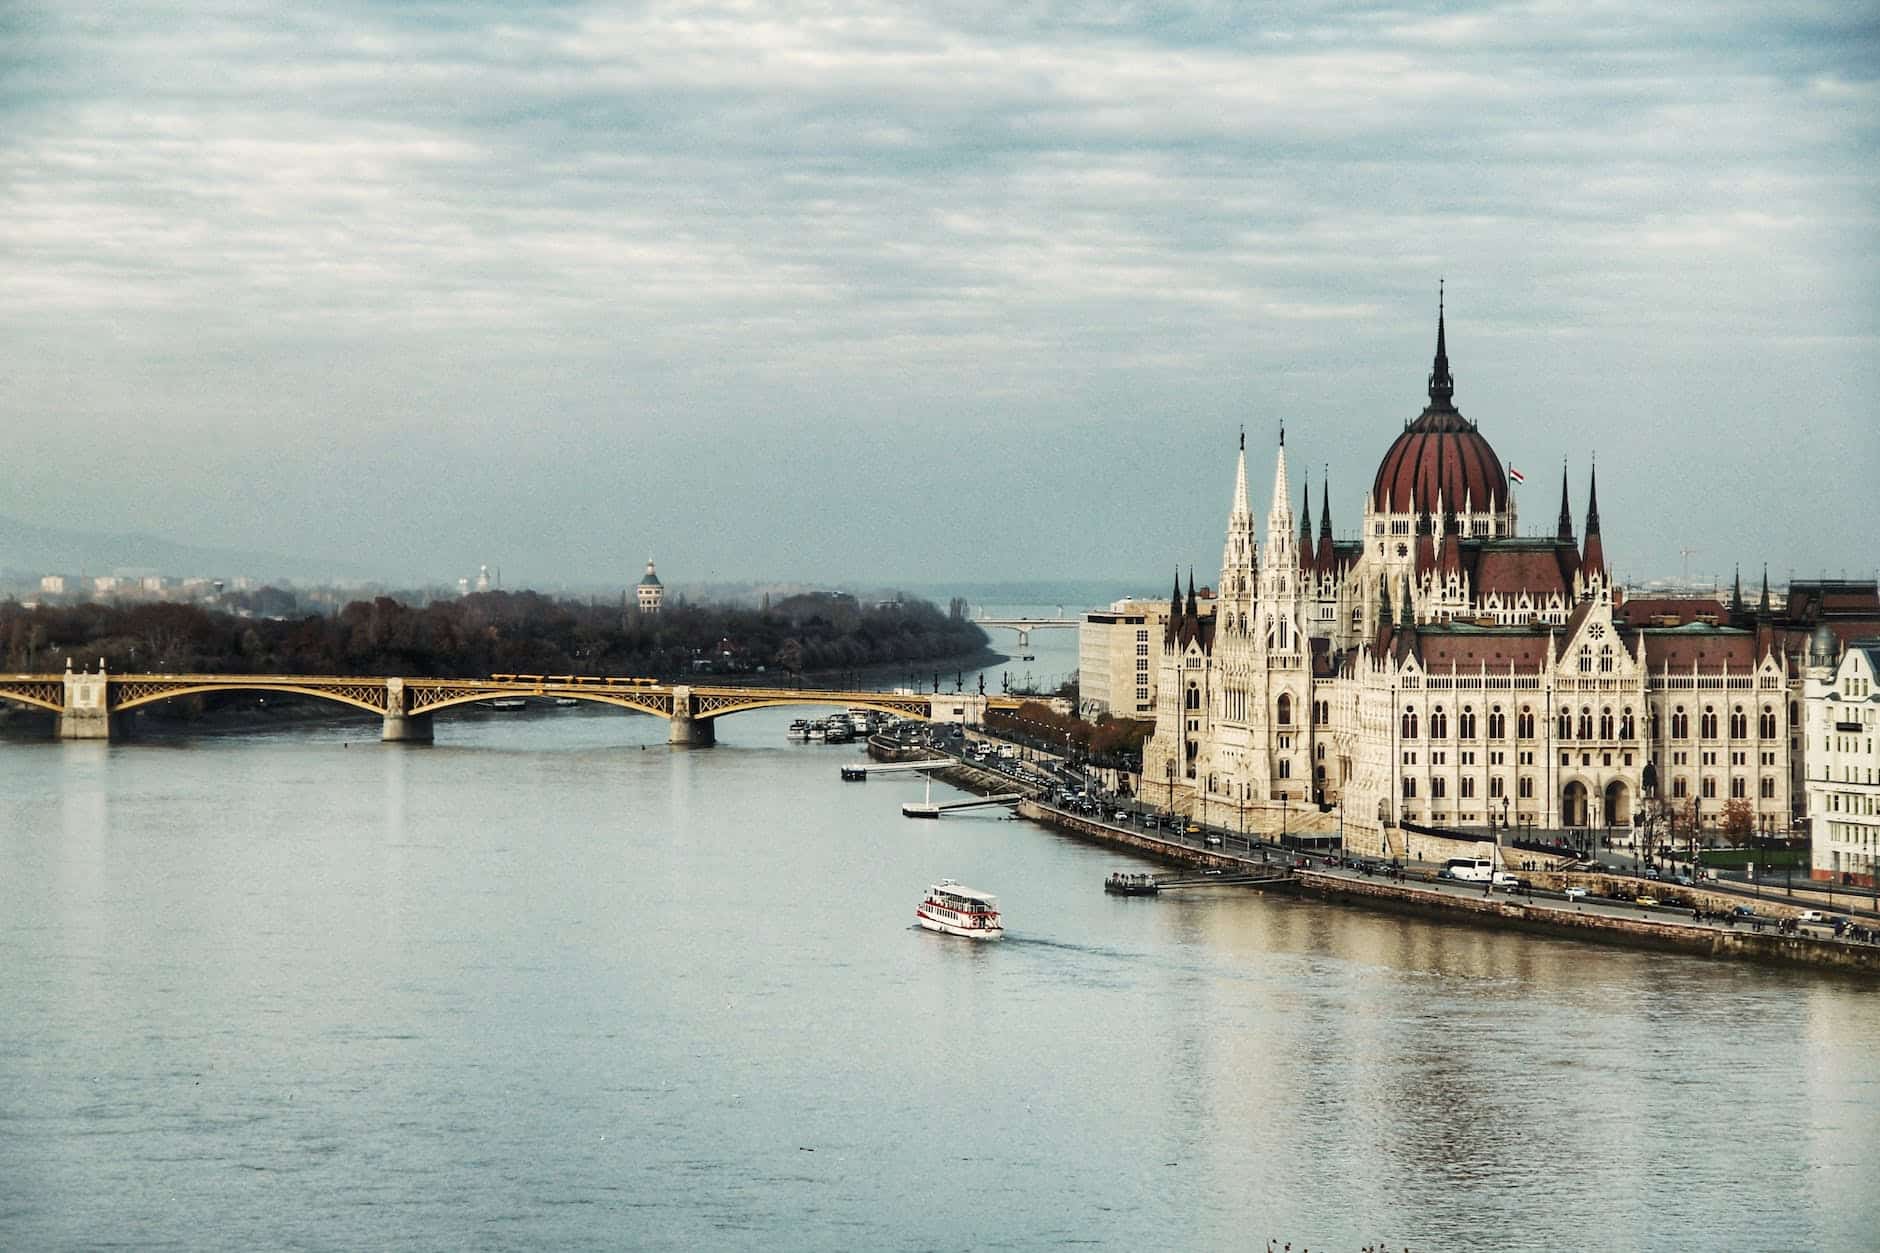 Budapest Hungary parliament building near body of water